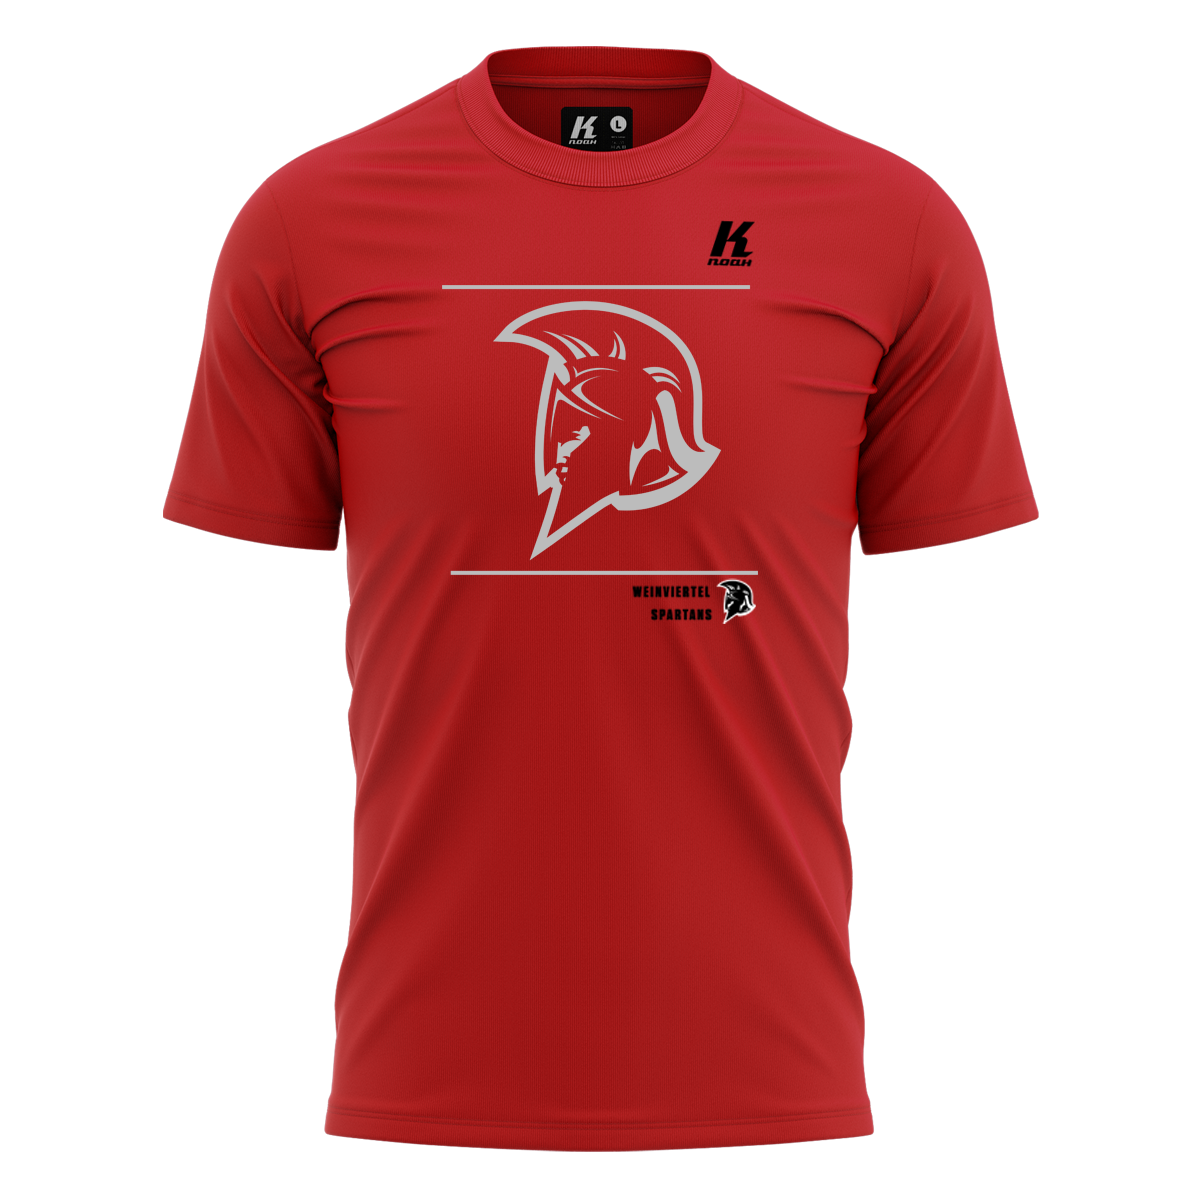 Spartans Fan Tee "Team Issue" red